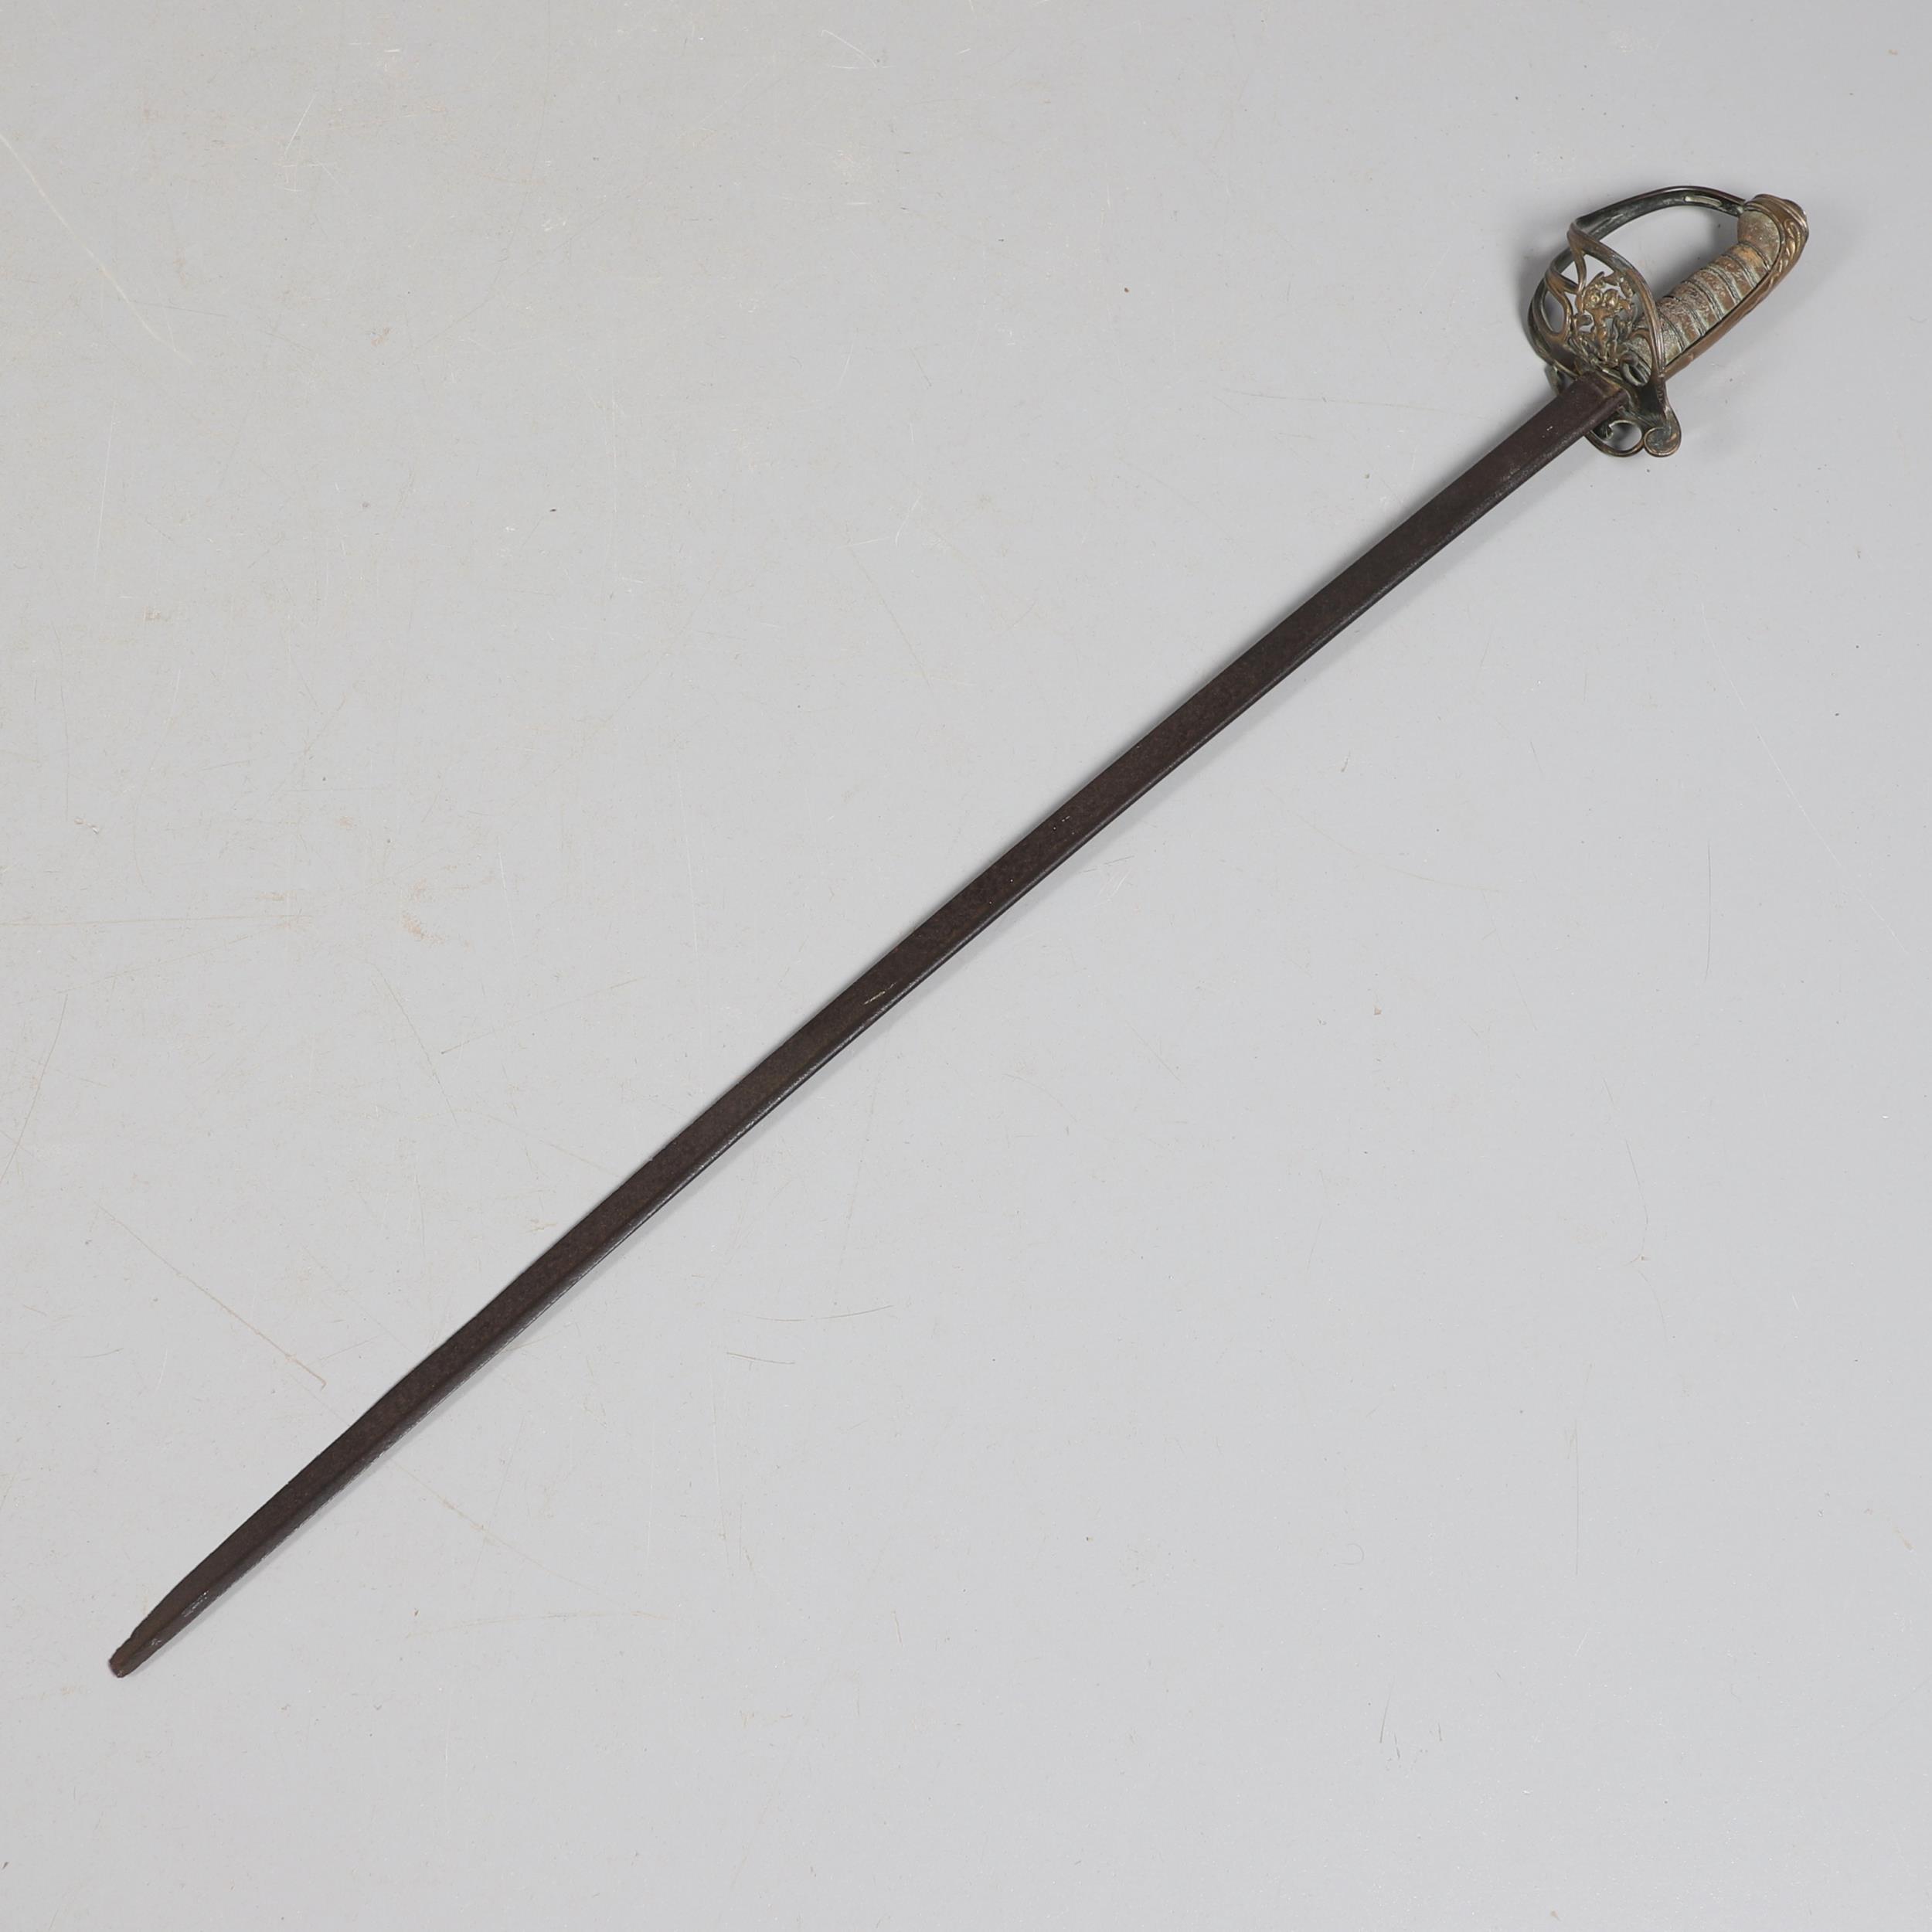 AN EAST INDIA COMPANY OFFICER'S 1822 PATTERN SWORD. - Image 4 of 10